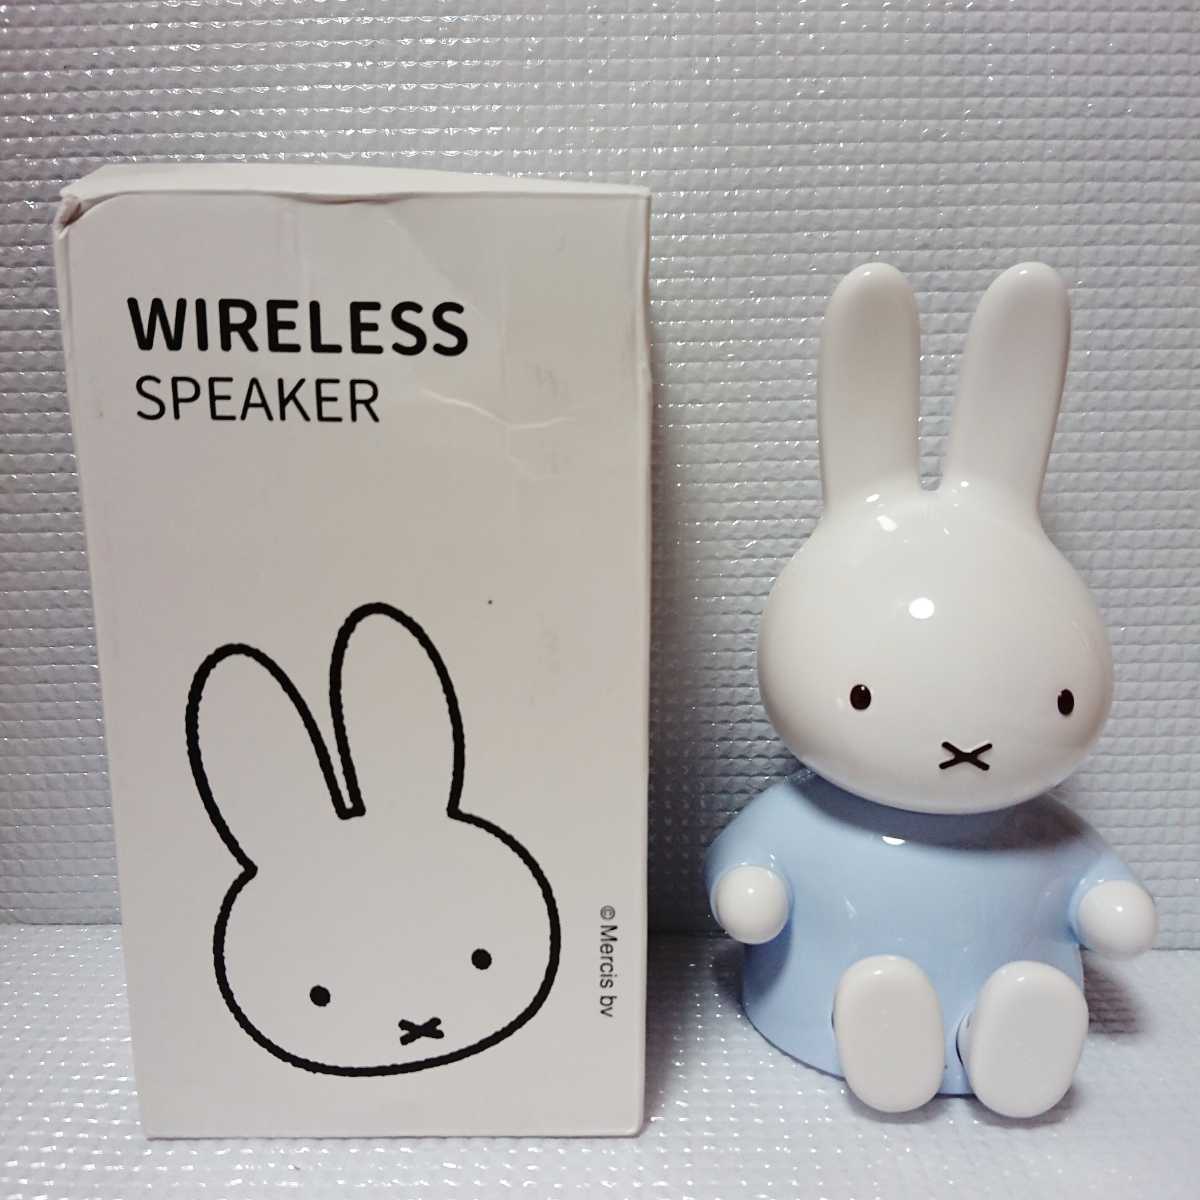  new goods * Miffy ×MIPOW*bluetooth speaker blue miffy Bluetooth my Poe stand portable wireless iPhone smartphone 